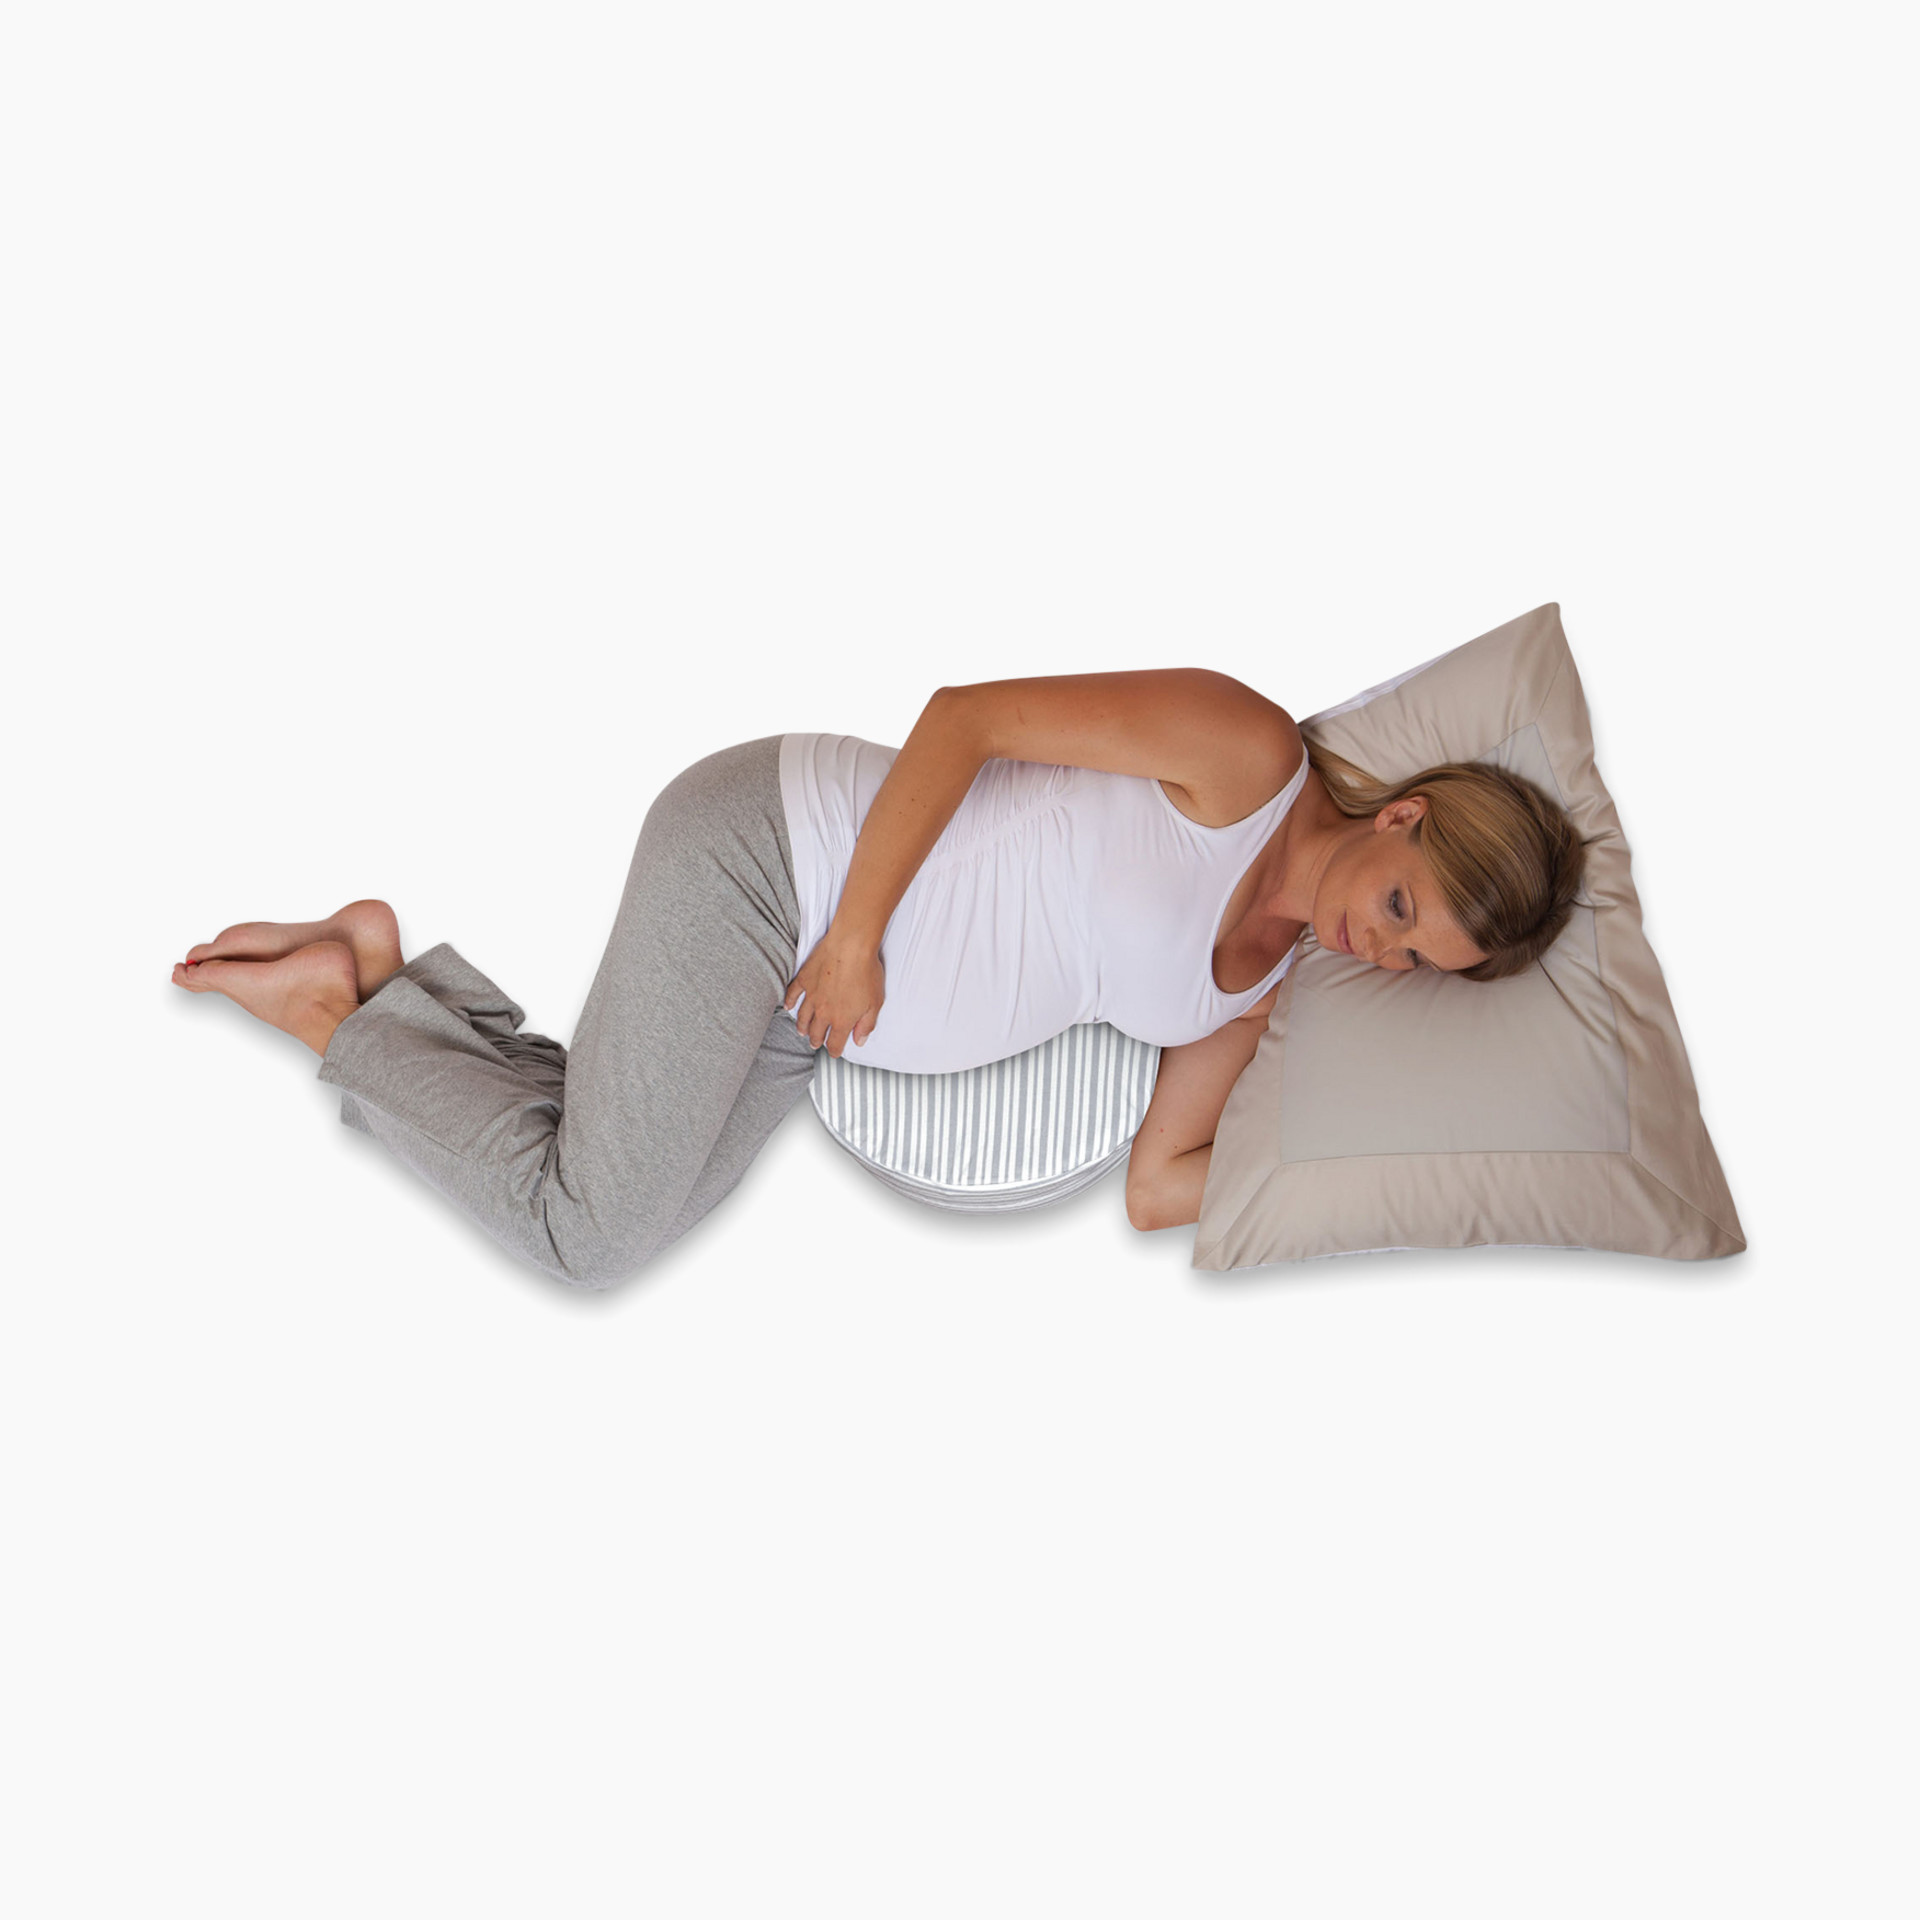 Momcozy F-shaped Pregnancy Pillow Offers Optimal Sleep Support for